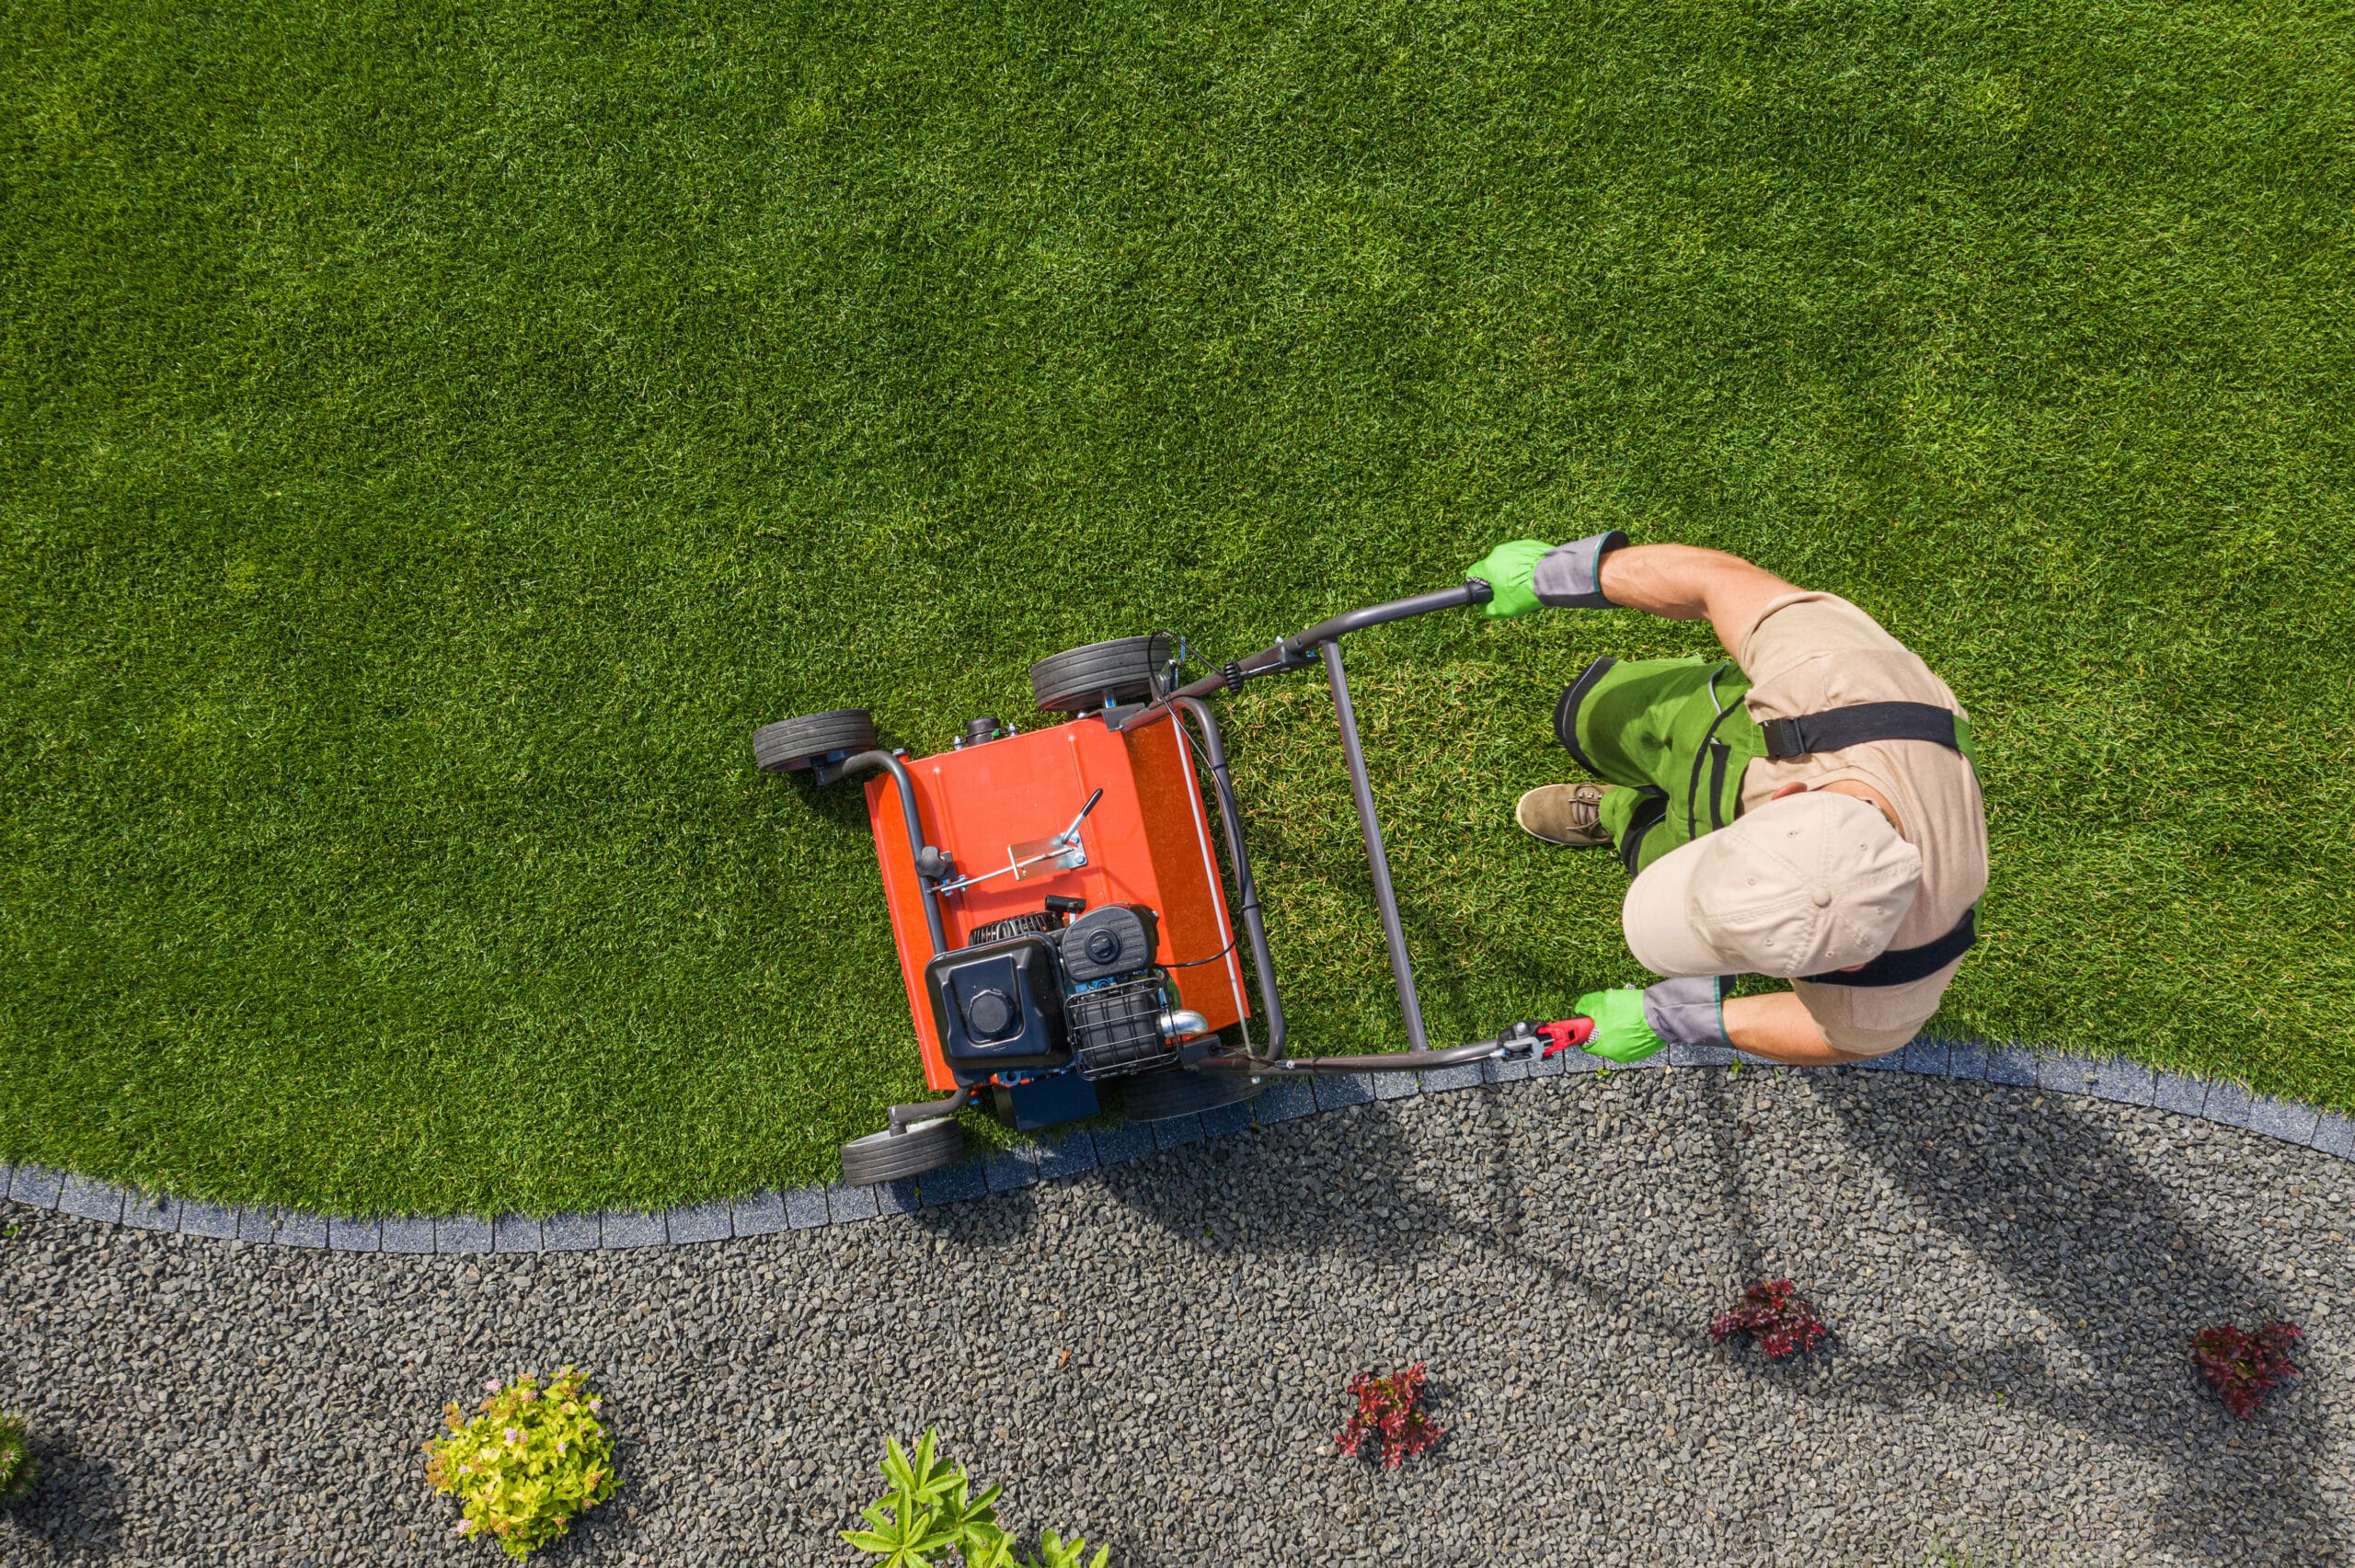 5 Things to Look for in a Landscape Services Company 7 | backyard garden lawn aeration job aerial view 2022 12 16 11 43 33 utc scaled